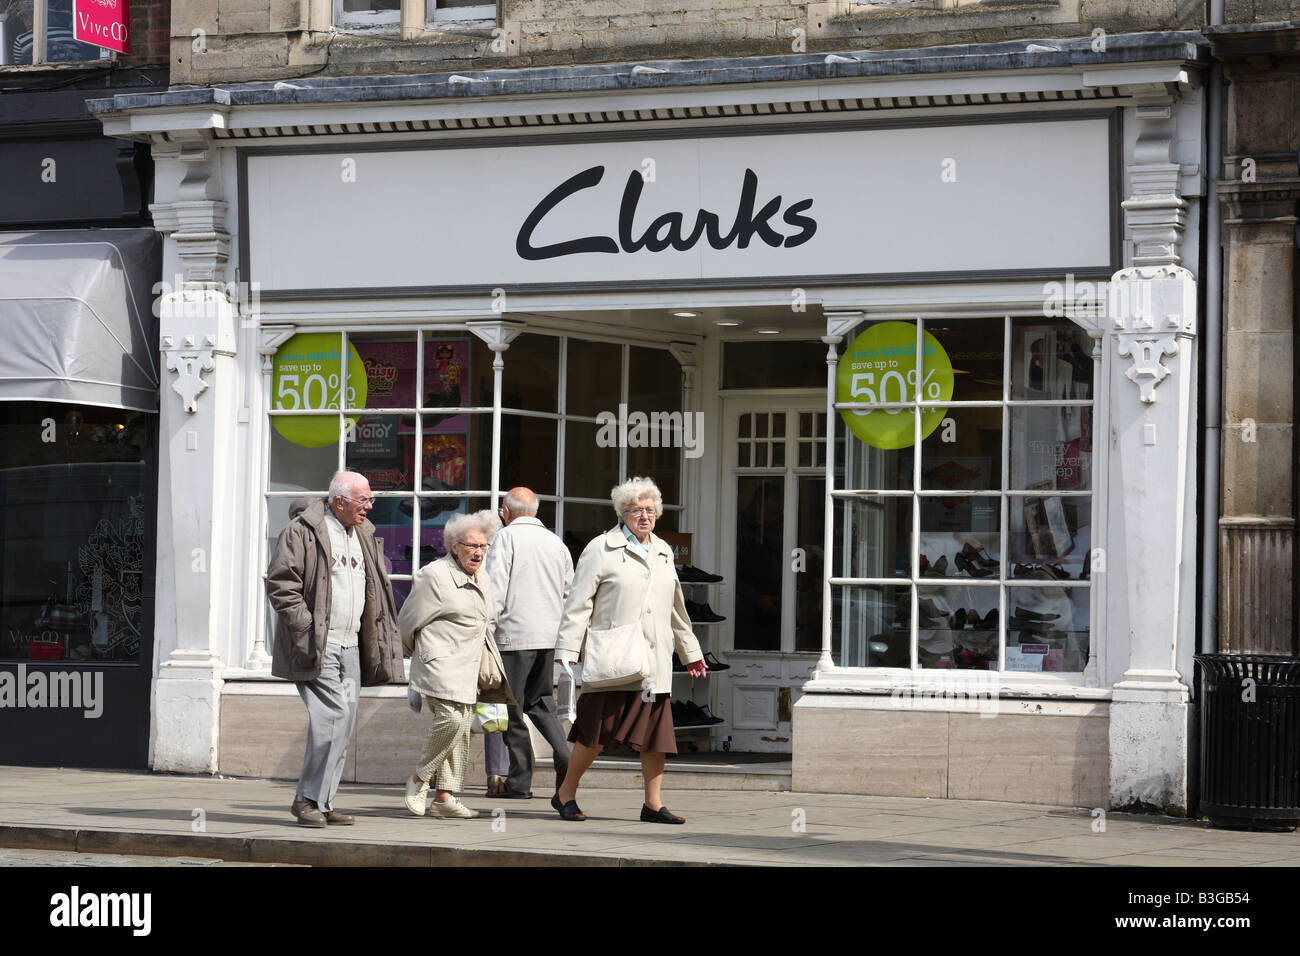 Clarks Shoes retail outlet, Stamford, Lincolnshire, England, U.K Stock  Photo - Alamy